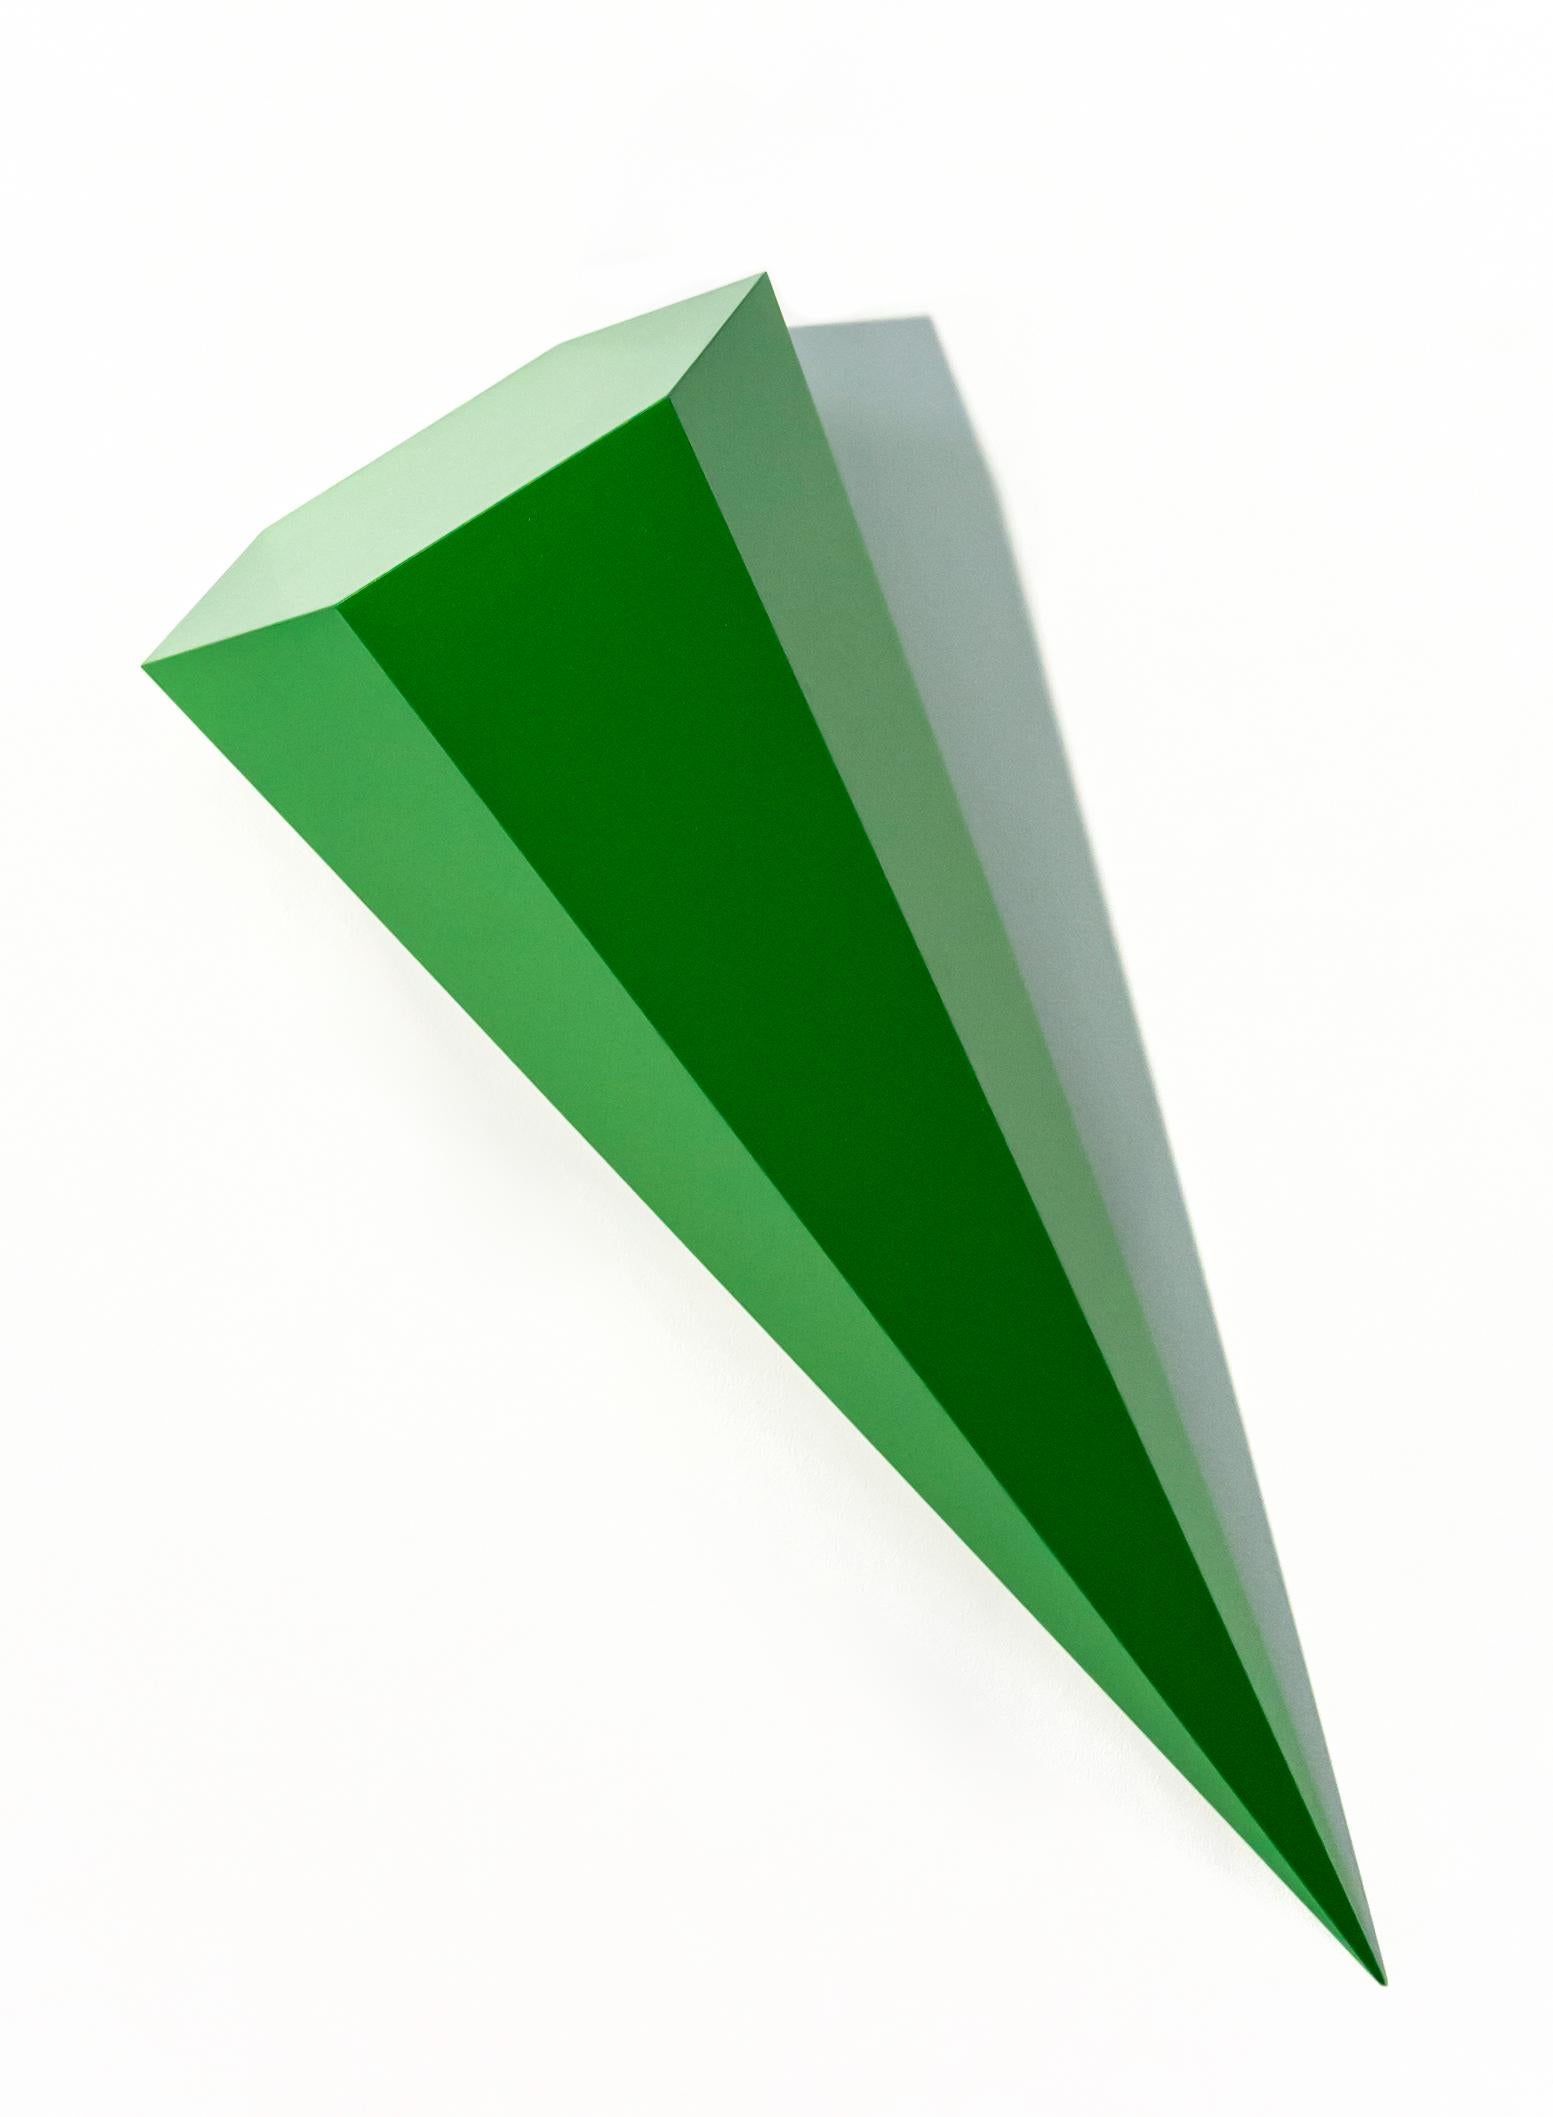 On Point - bright, glossy, green, smooth surfaced, abstract, wall sculpture